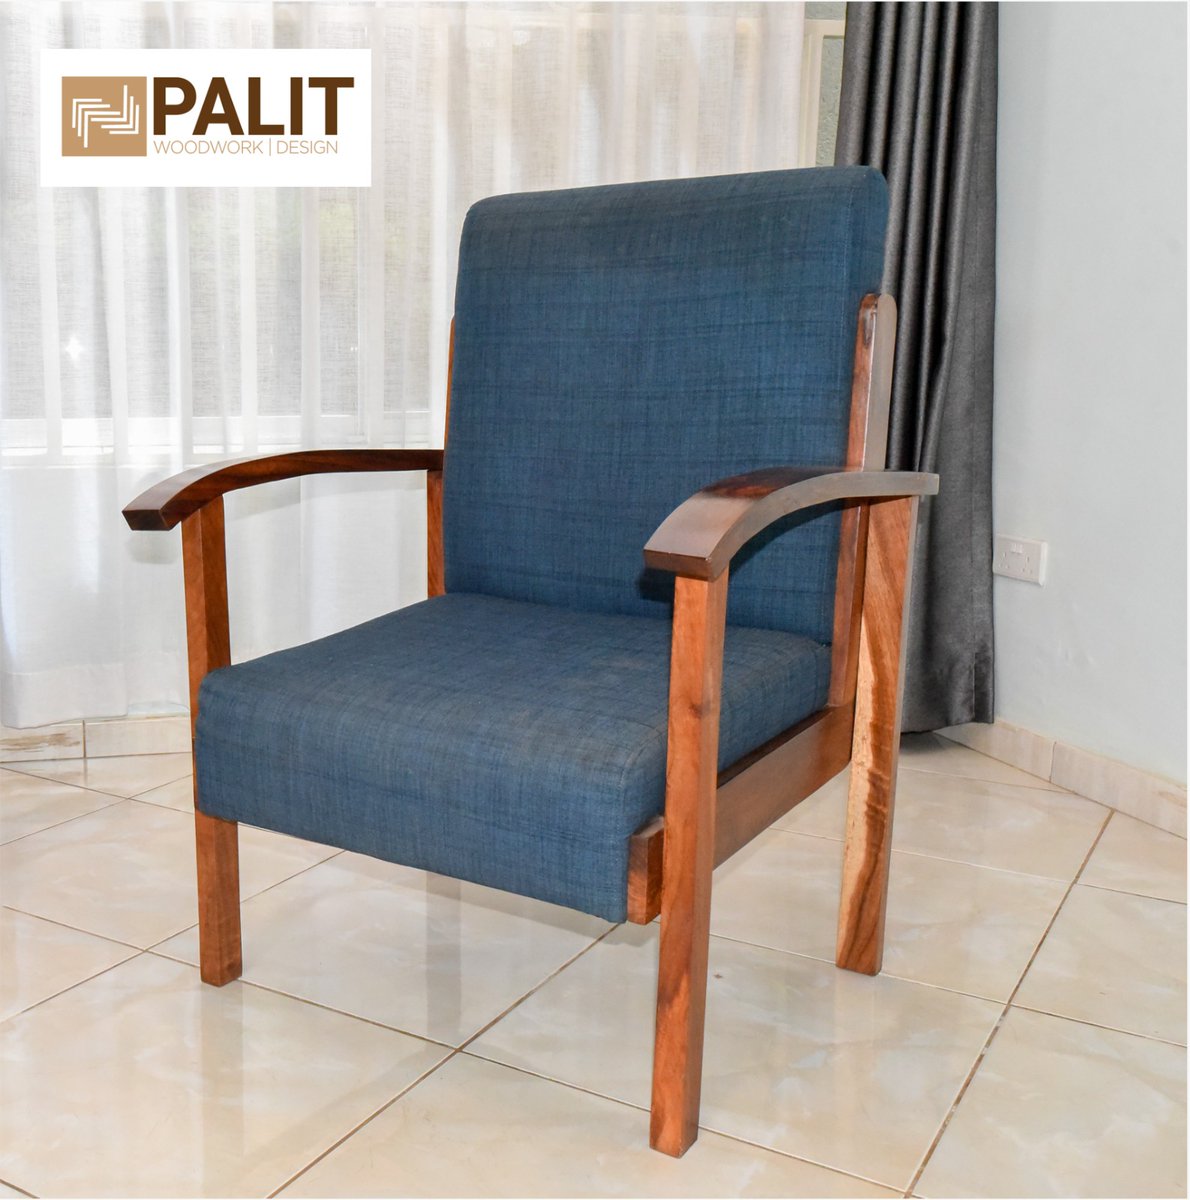 Don't you just want sit in this regal armchair to relax, think things over and enjoy the comfort it gives from the PALIT #WOODWORK #FURNITURE SHOP in Makindye on 0775000316 | 0755702085 ! 🛠️🪵  

#woodenfurniture #woodendecor #woodenaccessories